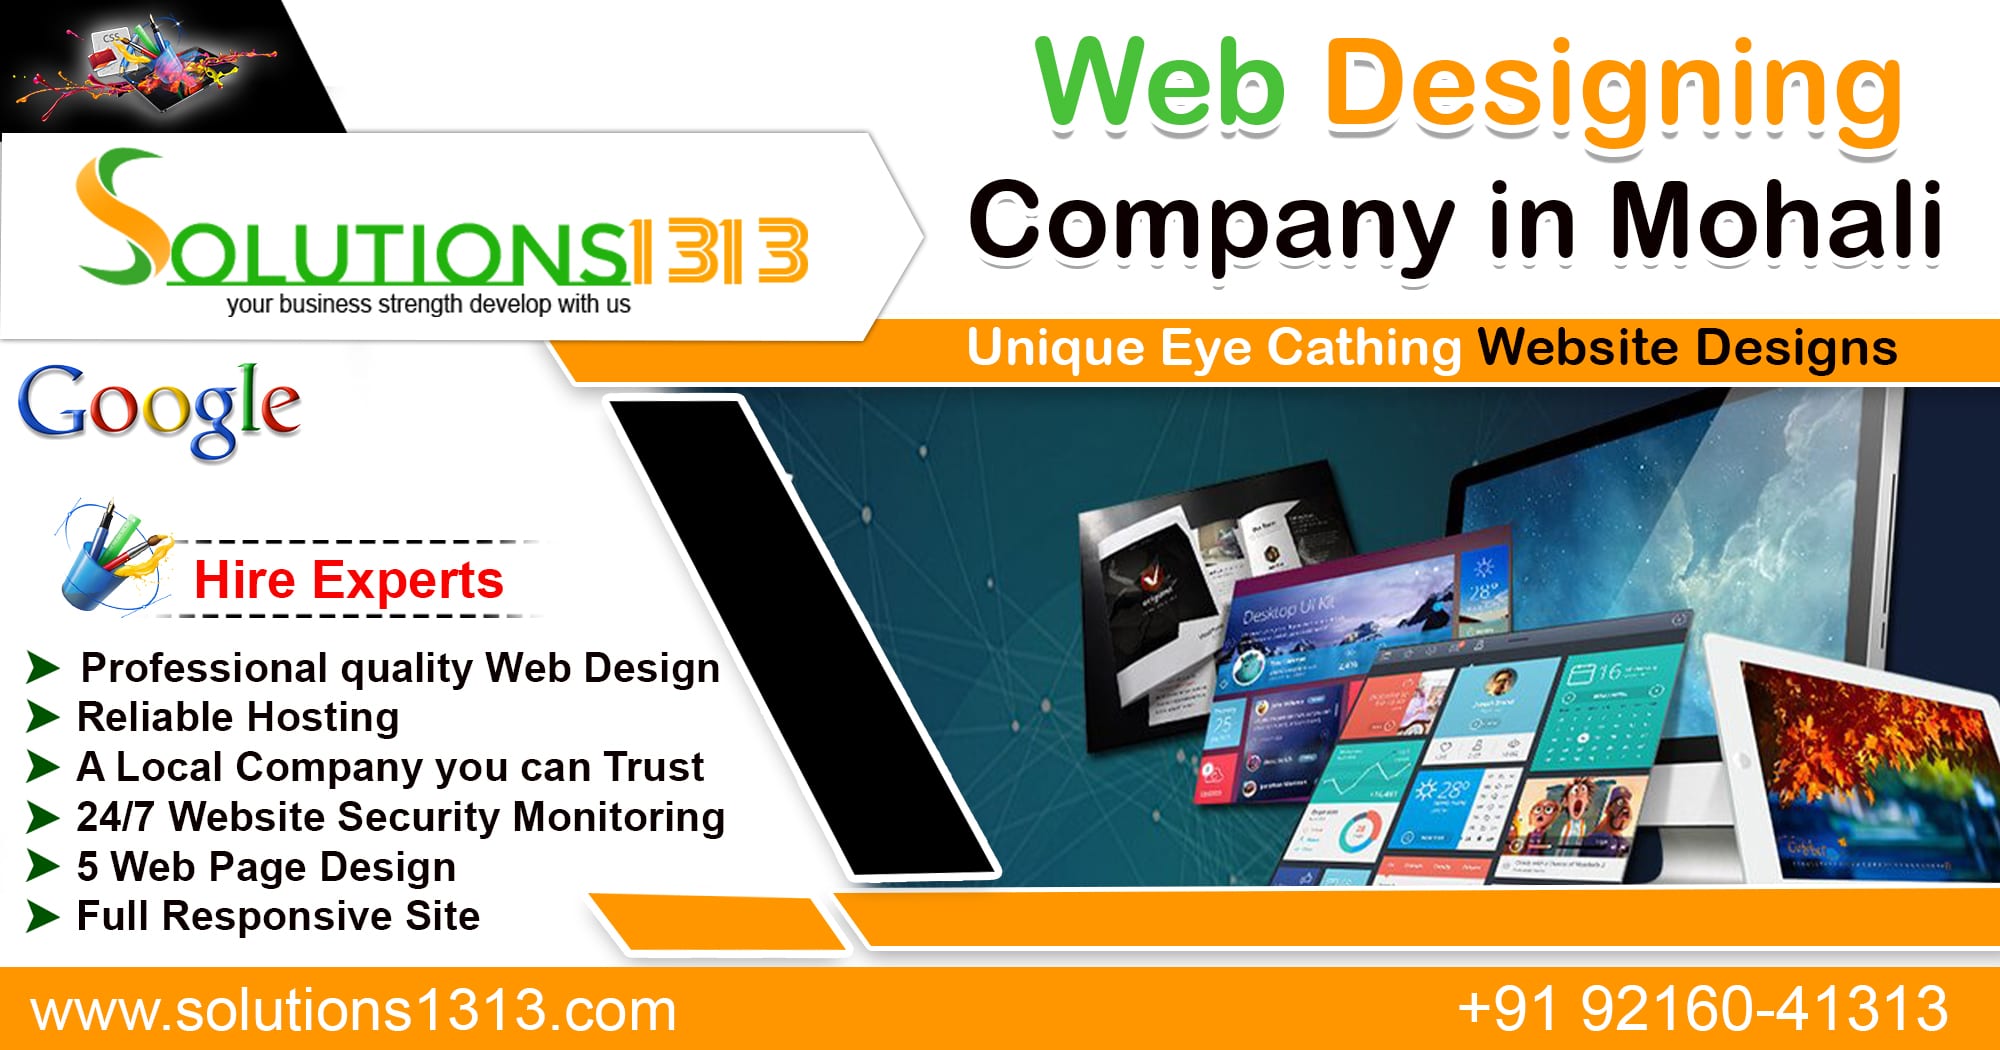 Web Designing Company in Mohali